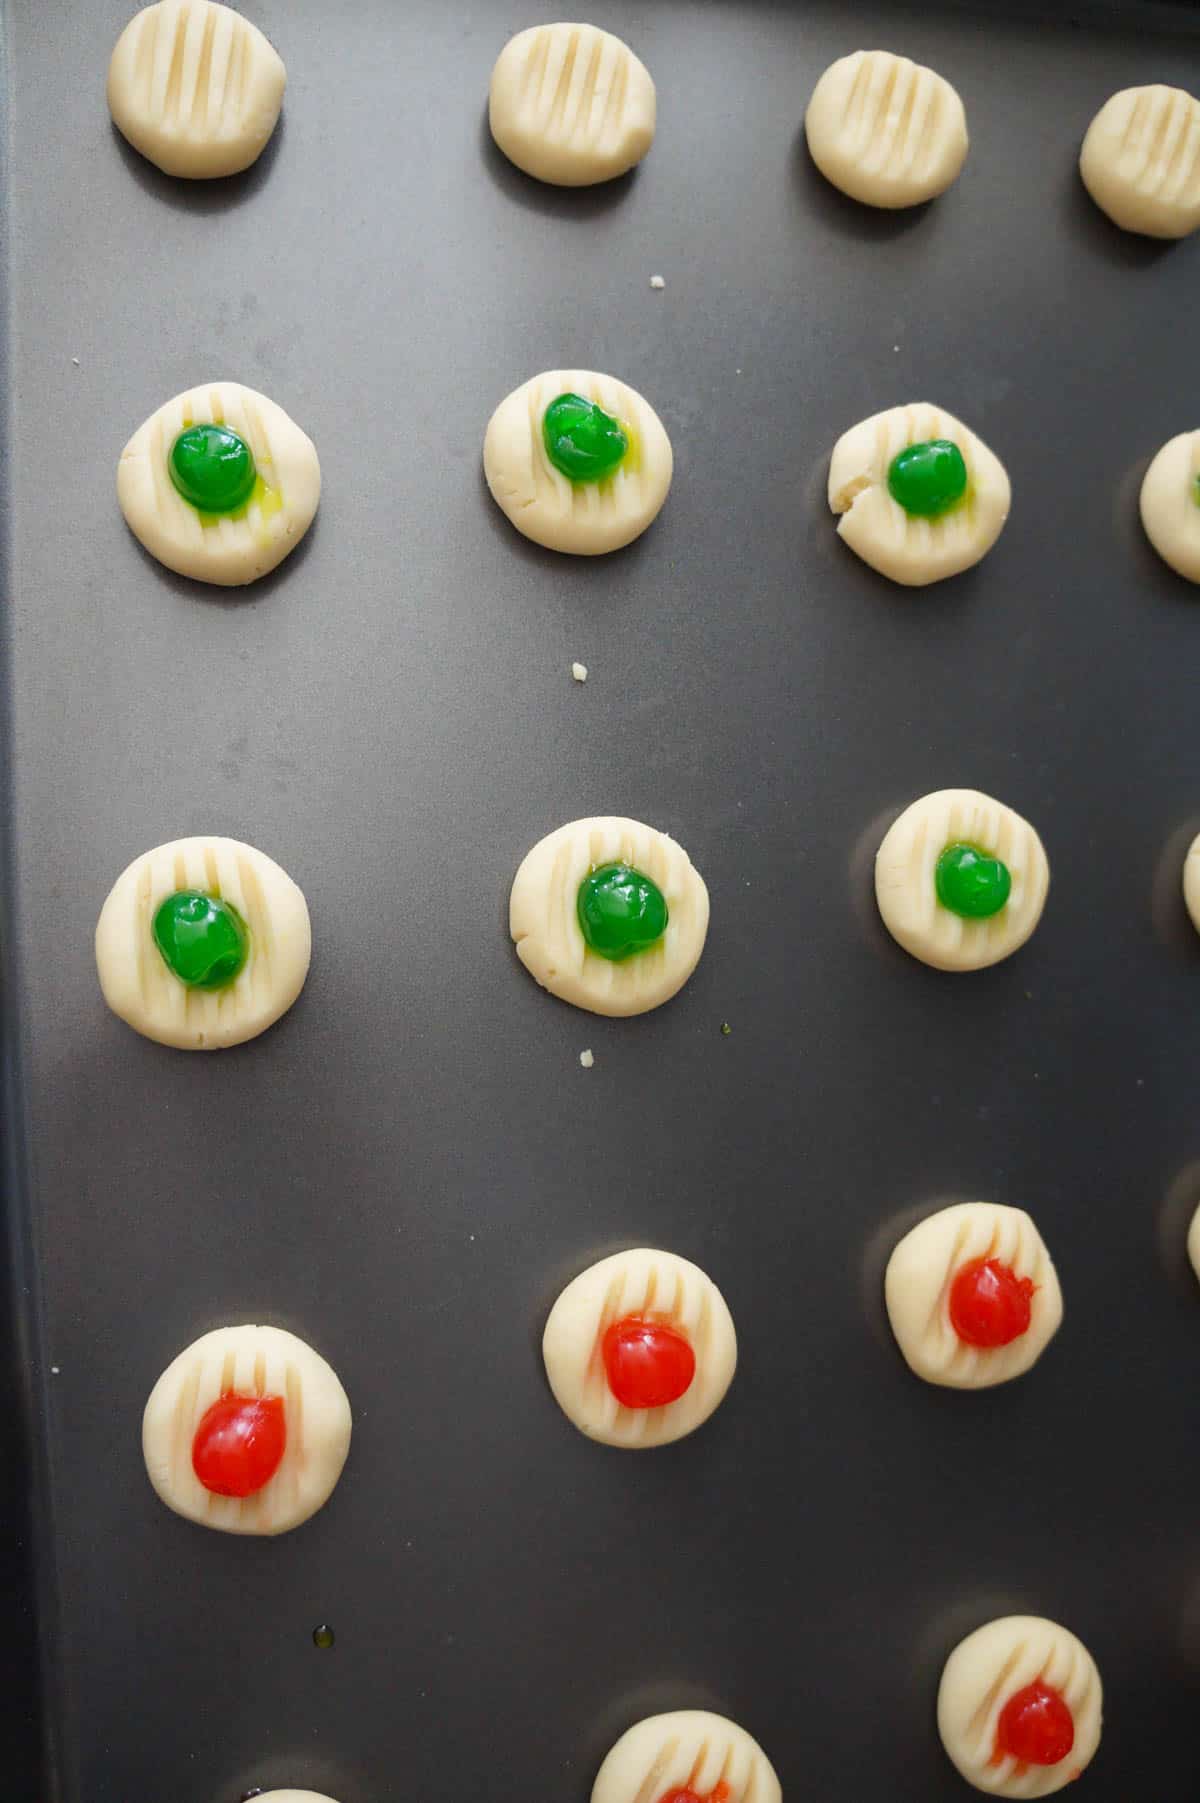 red and green maraschino cherries on top of whipped shortbread cookies before baking